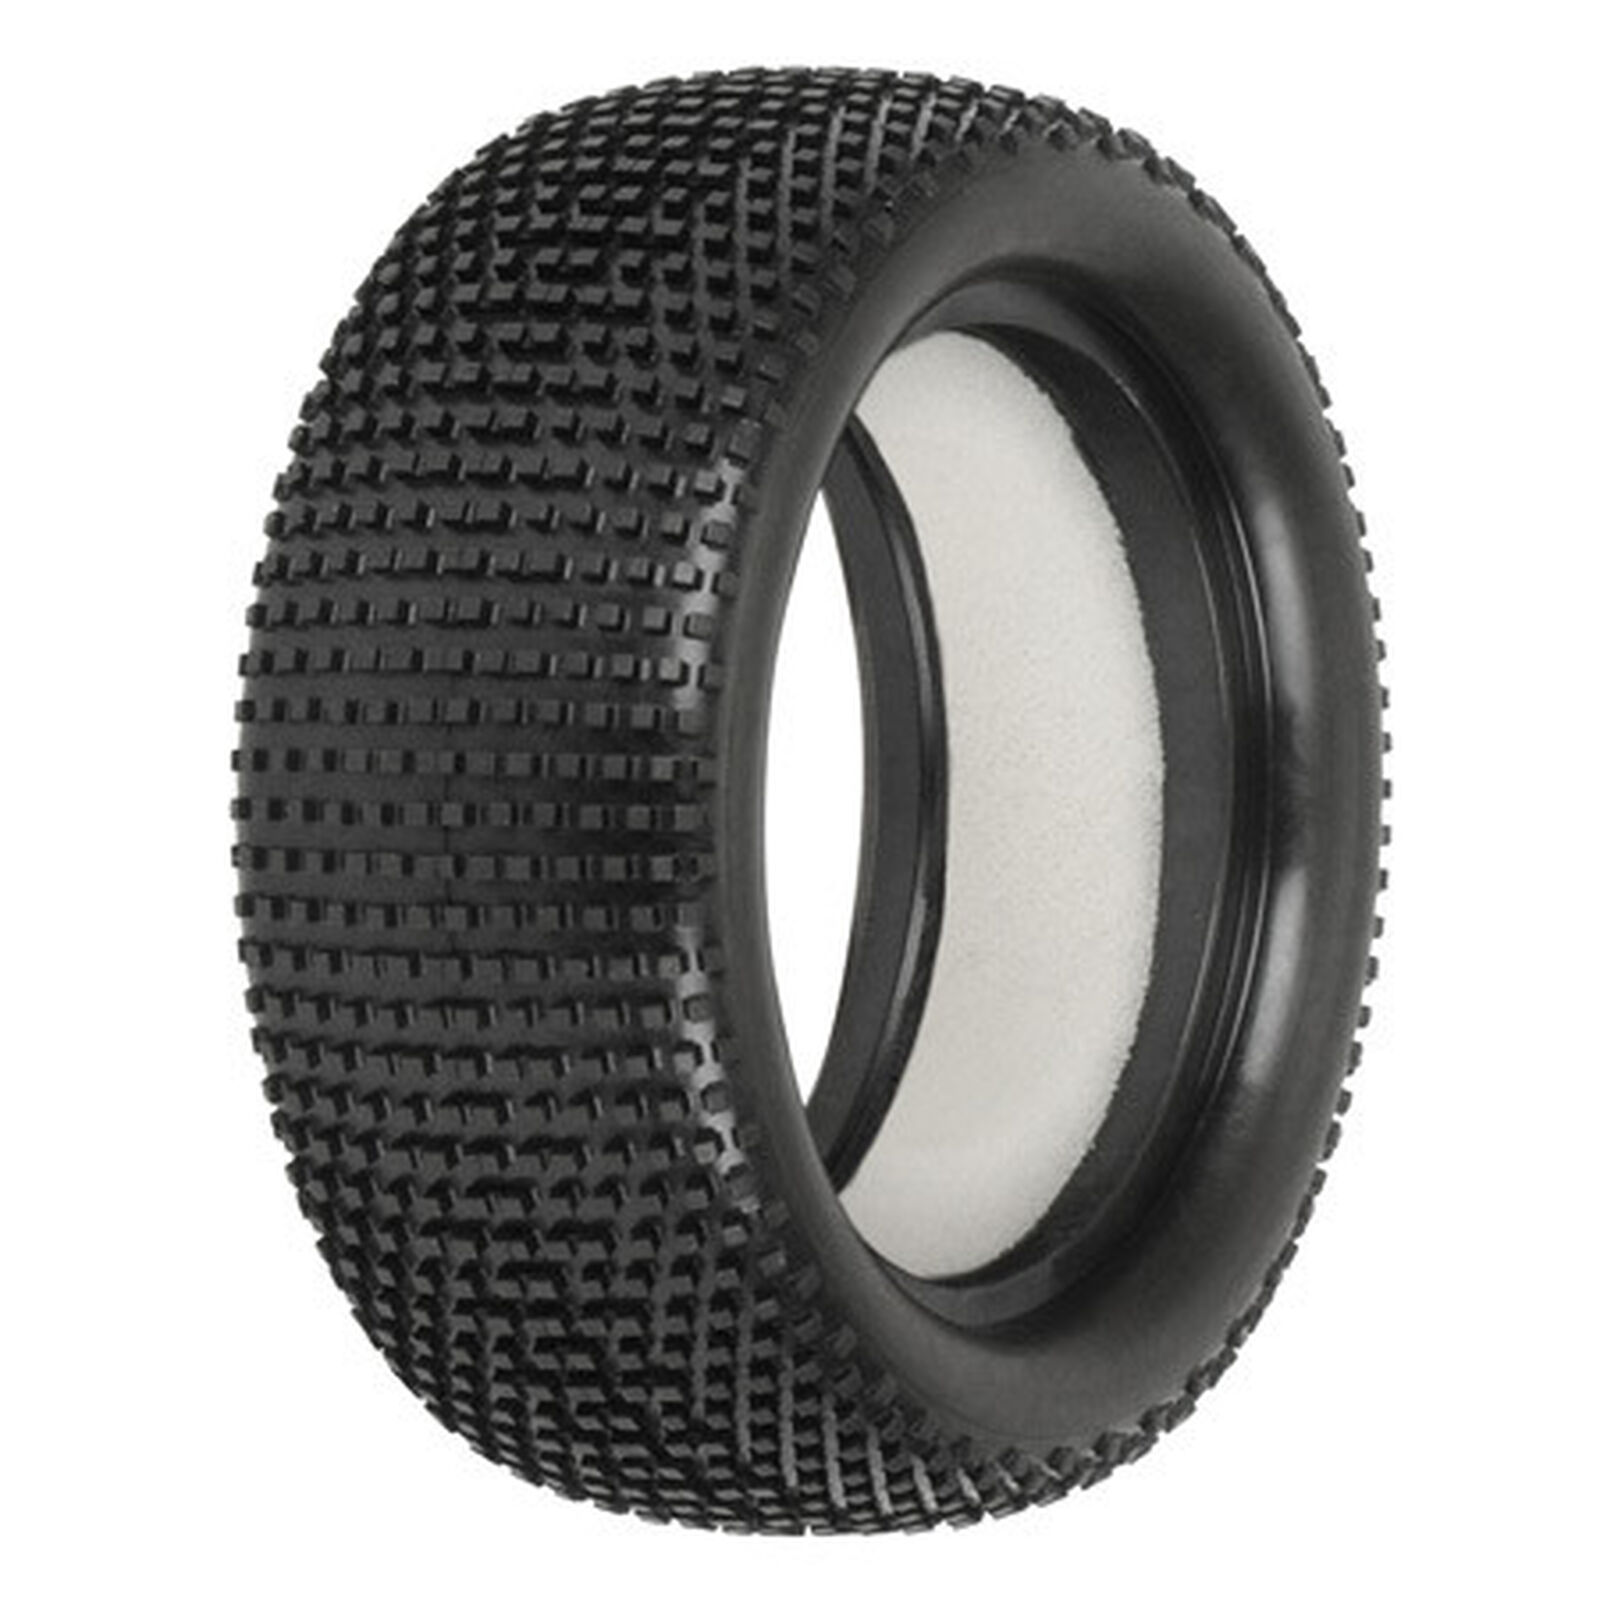 1/10 Front Hole Shot 2.0 2.2 4WD M3 Tires with Impact Firm Foam inserts: Off-Road Buggy (2)